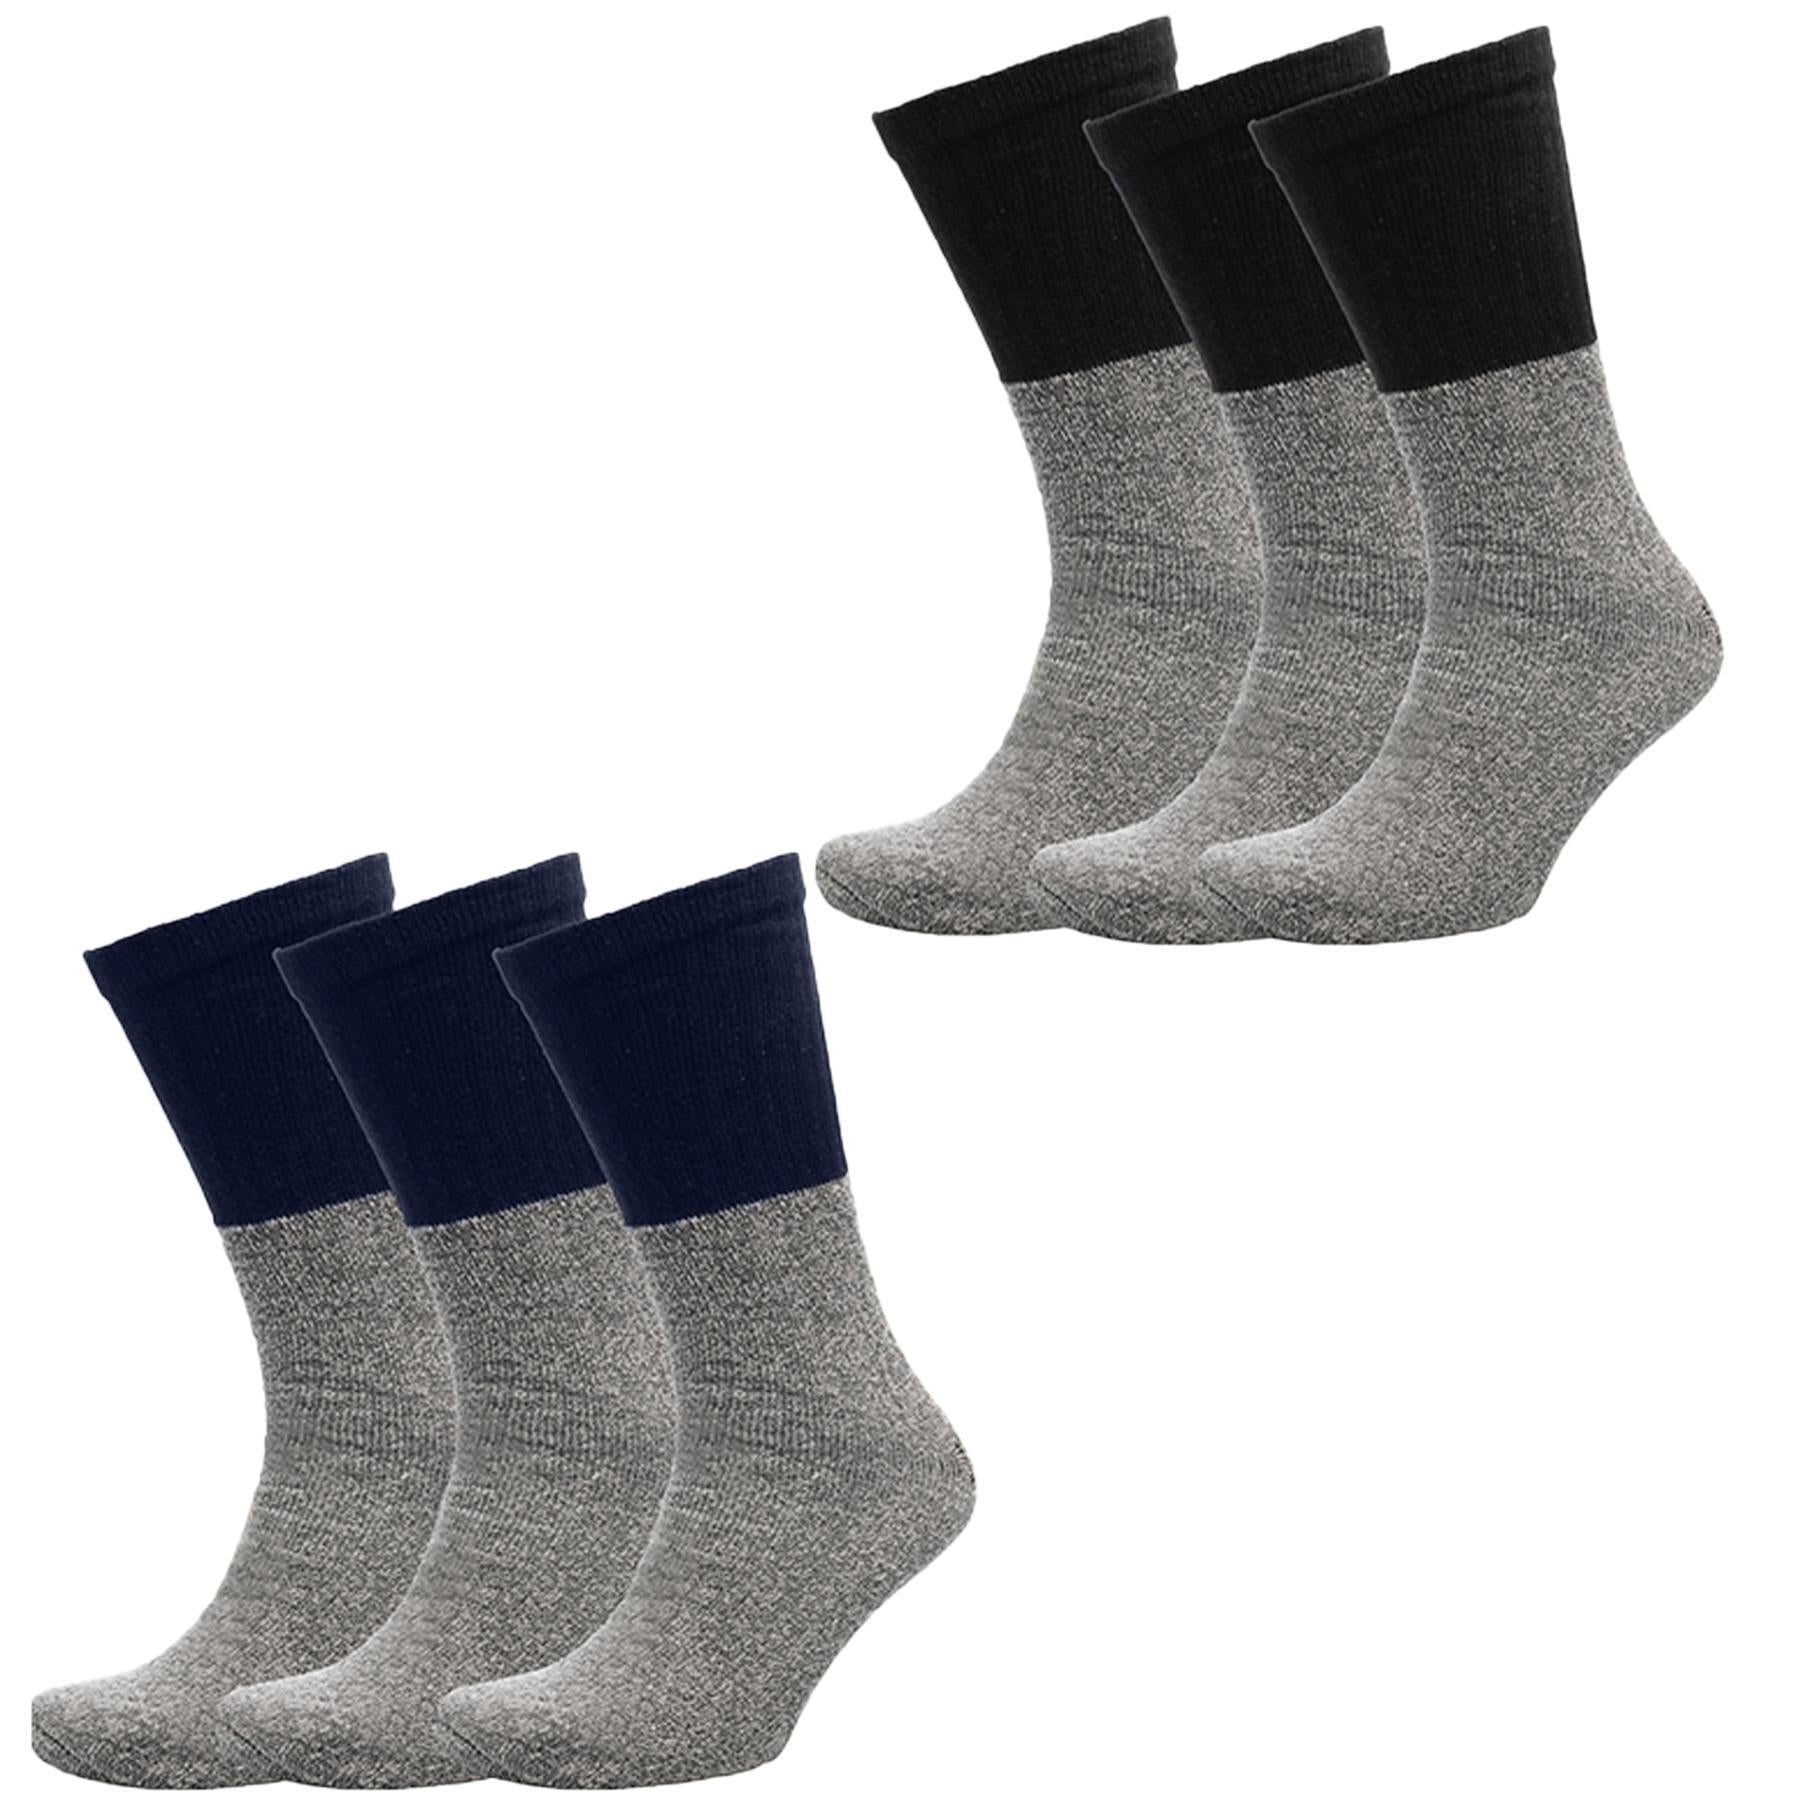 Mens Blended Thermal Insulated Heat Winter Cotton Pack Of 3 Comfortable Socks